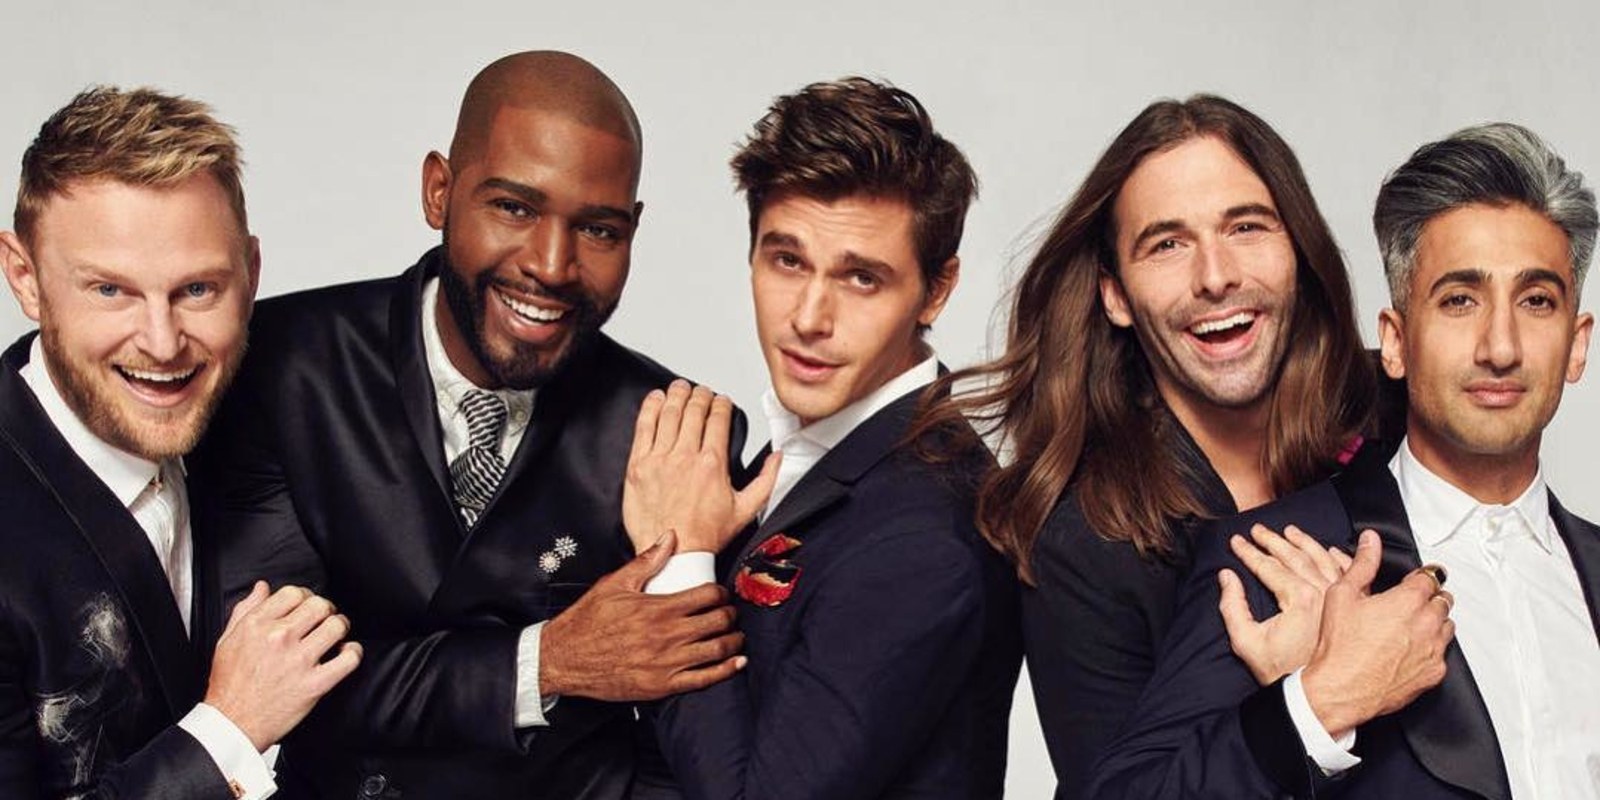 Season 3 of Queer Eye brings back the Fab Five, and they are better than ever. Photo courtesy of W Magazine